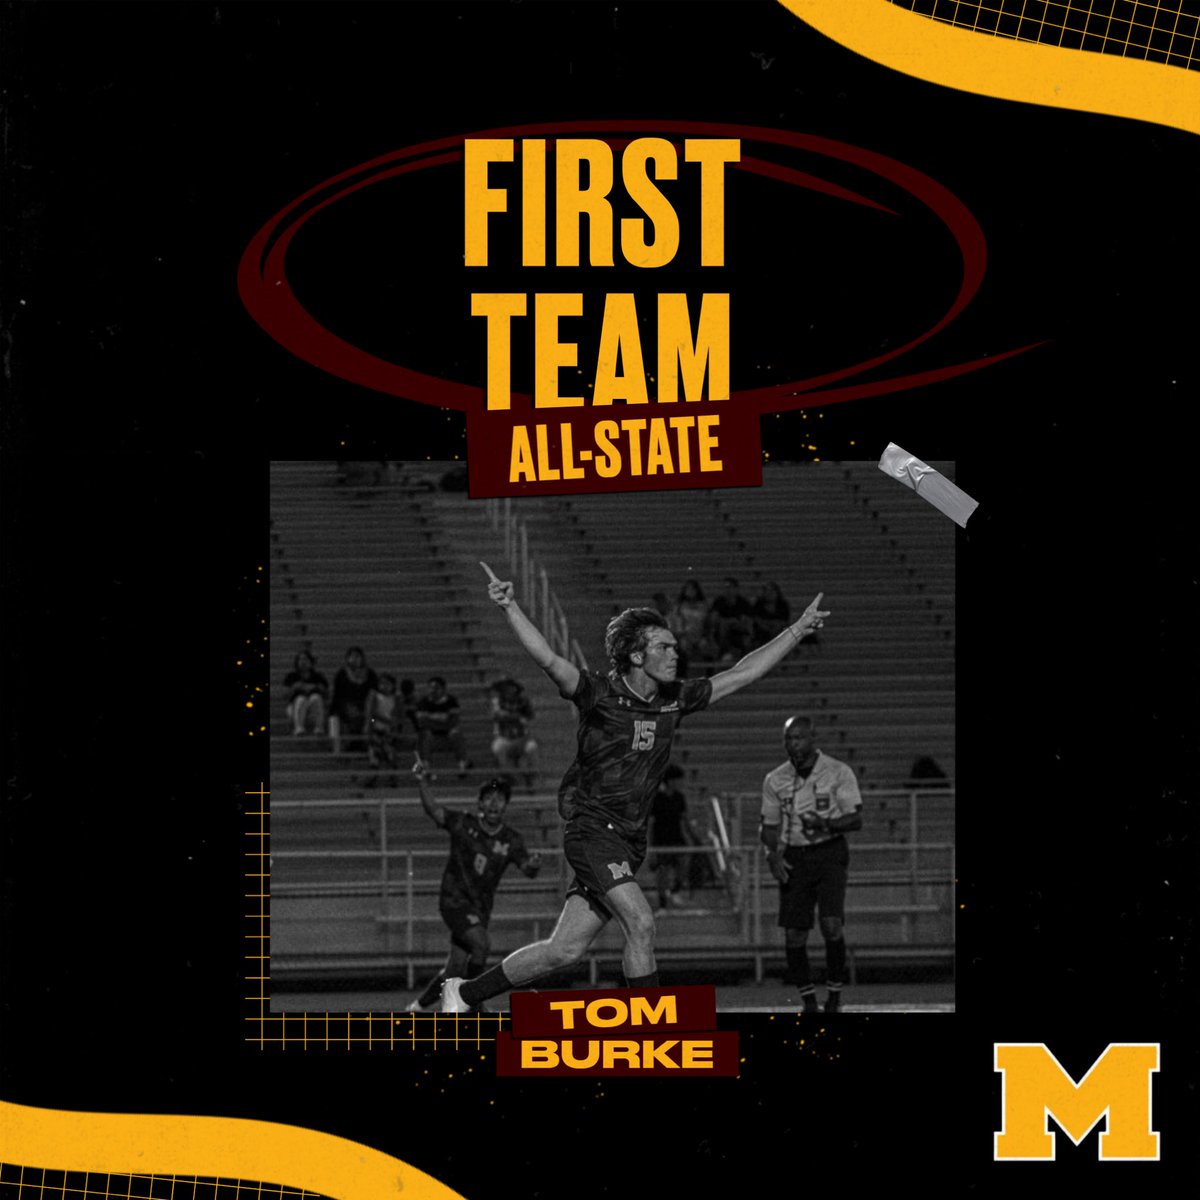 Congratulations to senior Tom Burke who was named First Team All-State for his performance on the pitch this past fall! 〽️🏴‍☠️